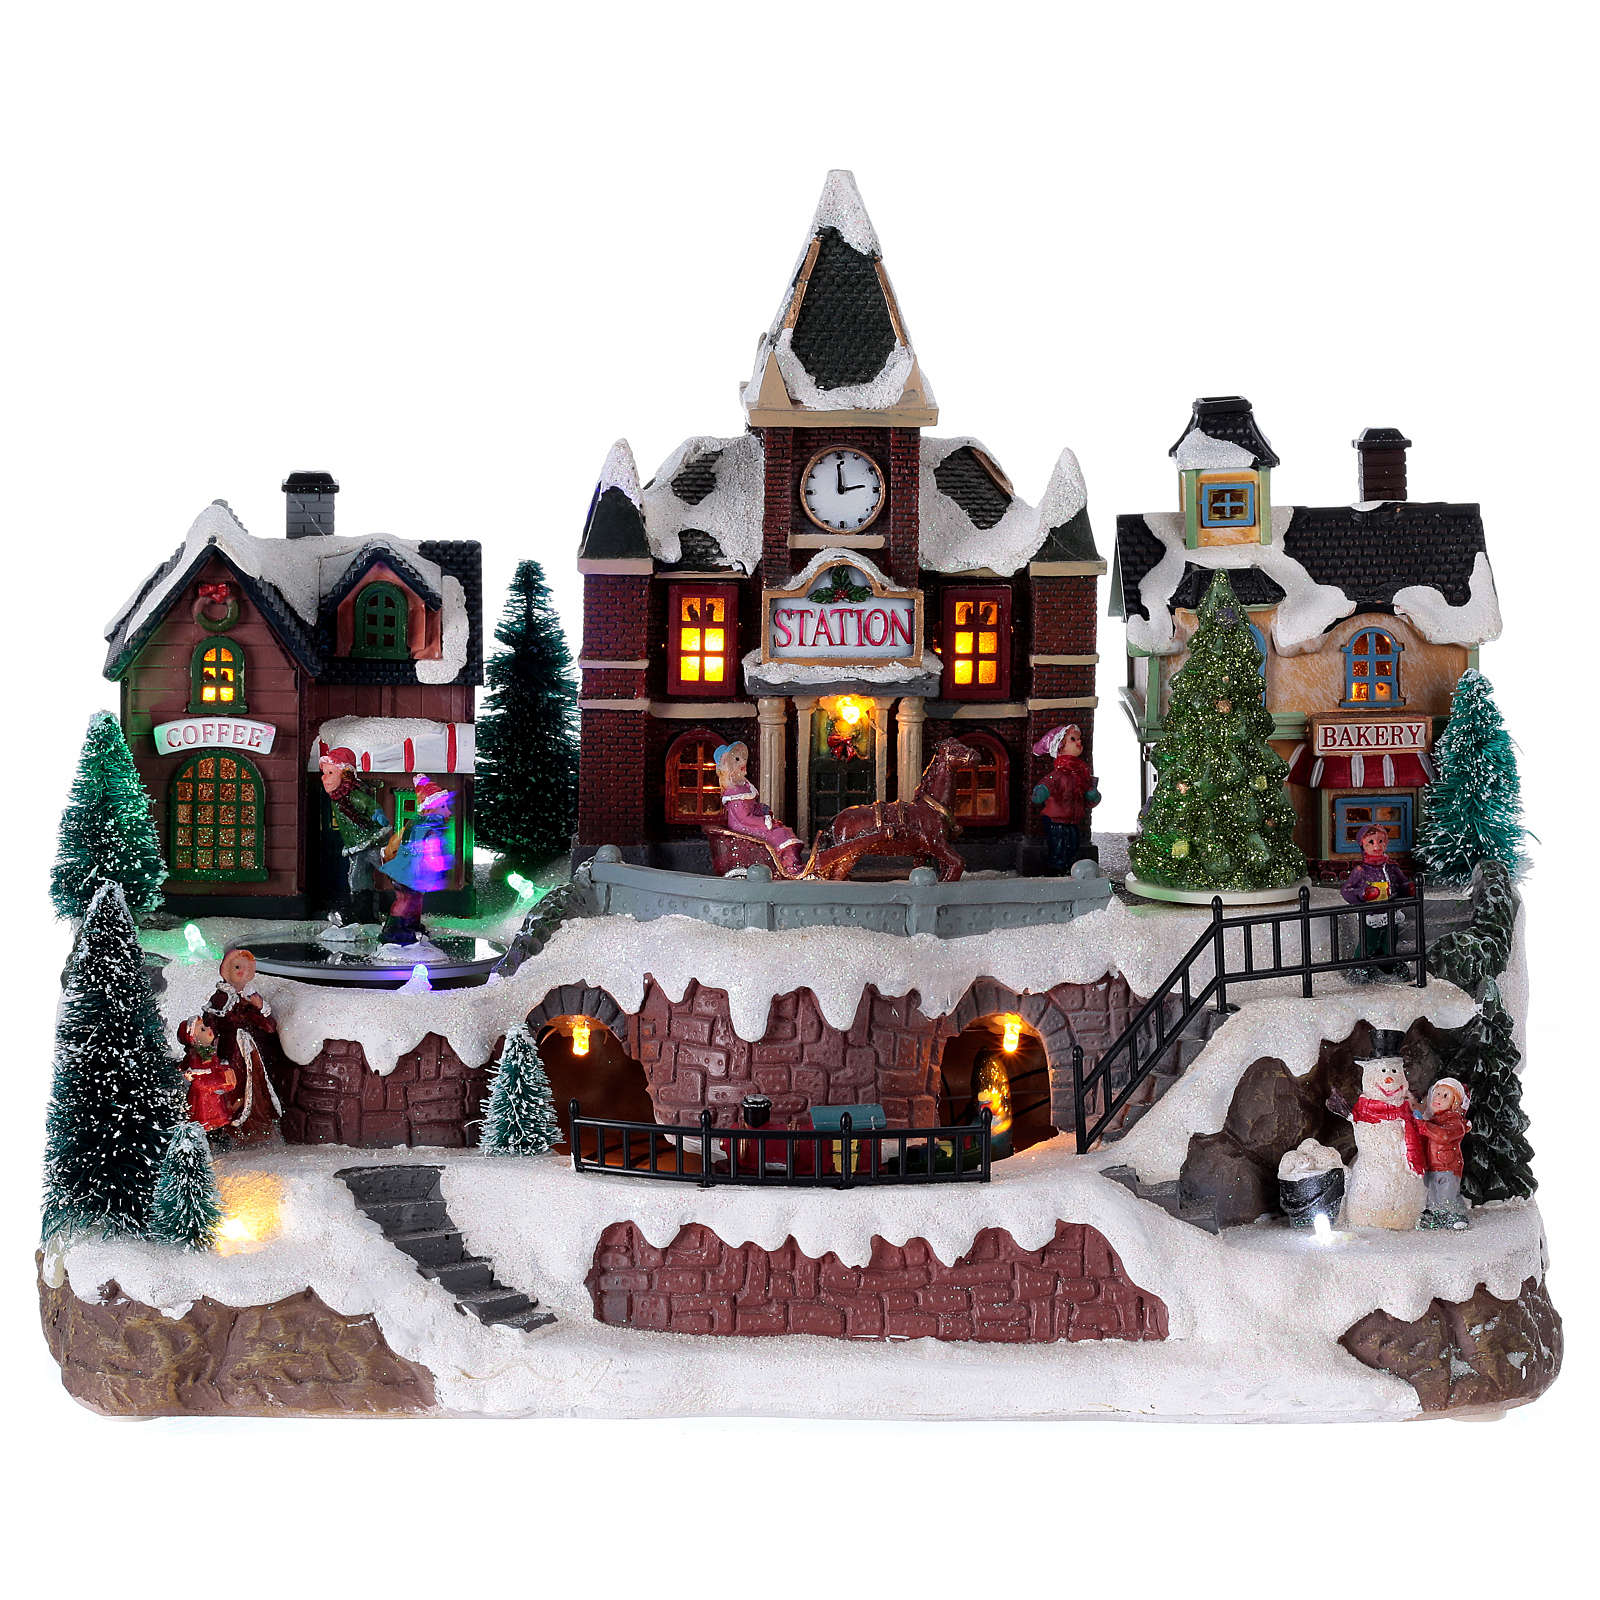 Animated musical Christmas village with train and iced lake | online ...